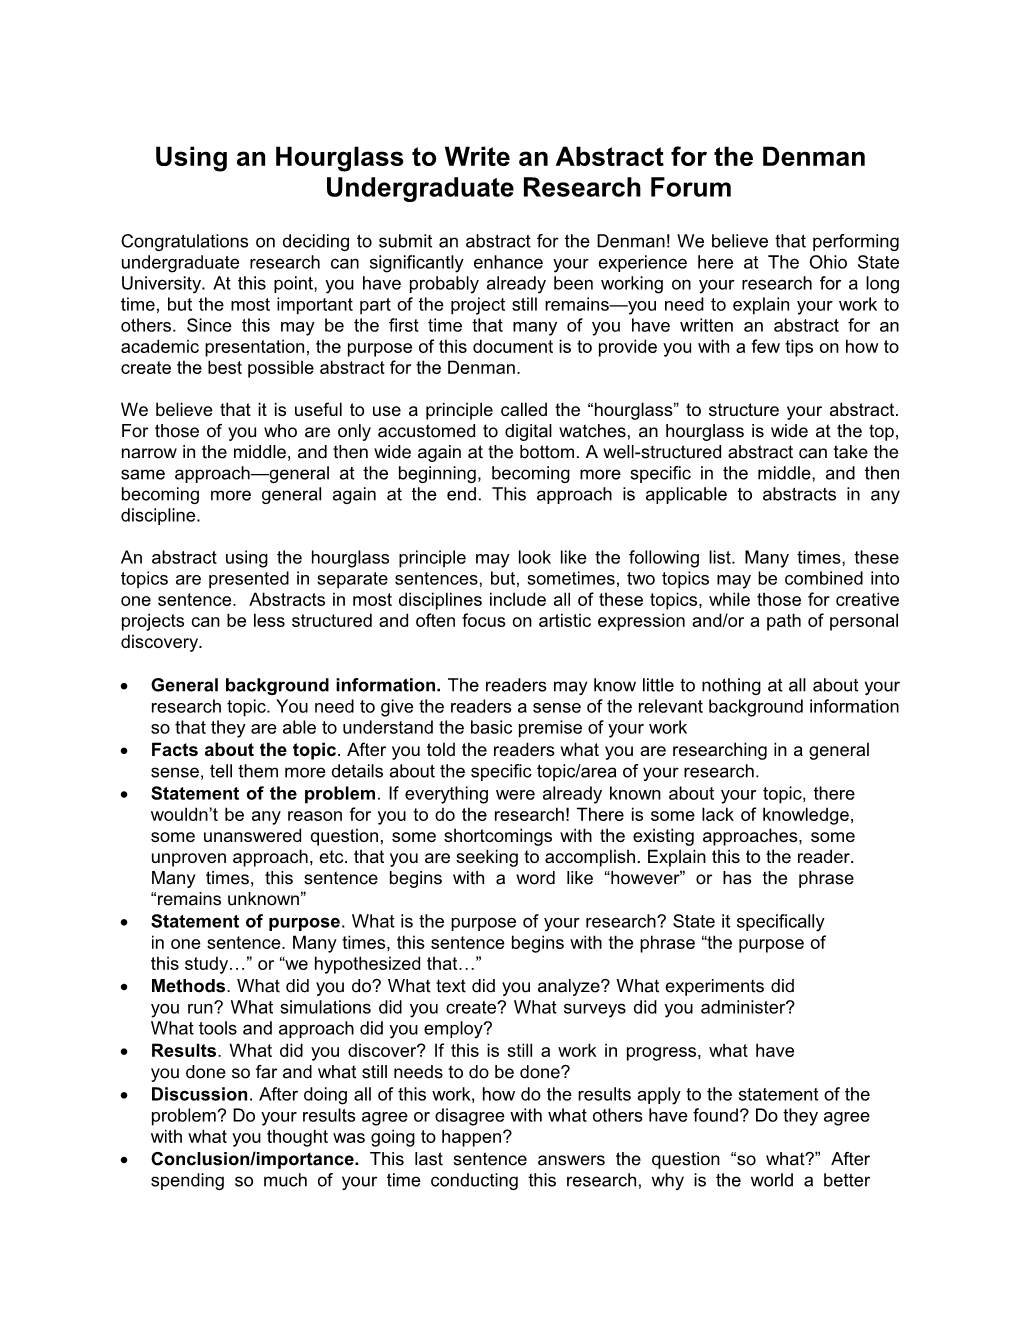 Using and Hourglass to Write an Abstract for the Denman Undergraduate Research Forum